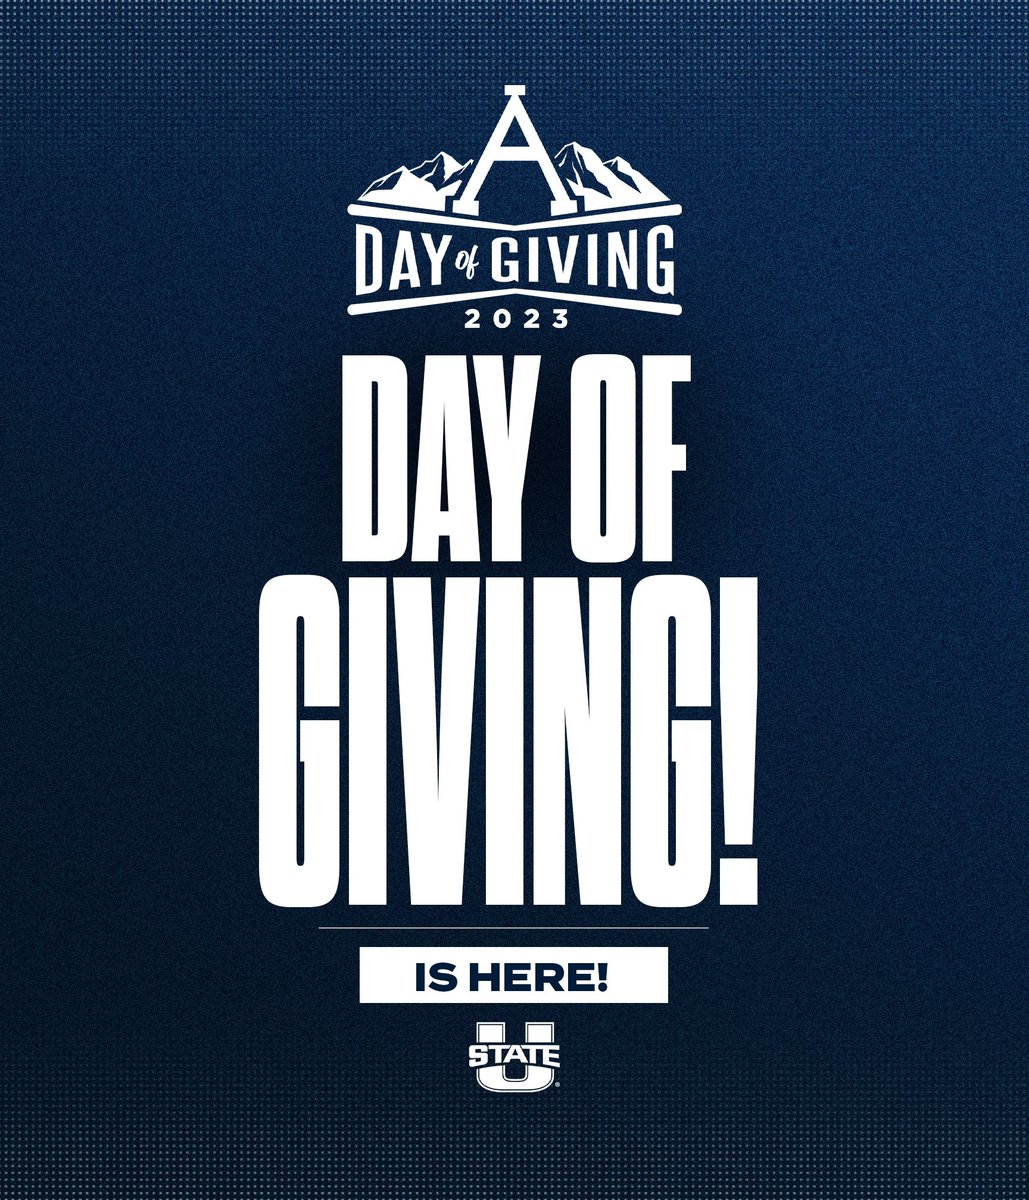 Thank you for everyone who has already contributed to our Aggie Day of Giving! 

You are assisting our student-athletes achieve excellence. 🤘🏻💙

➡️ bit.ly/DayToGive